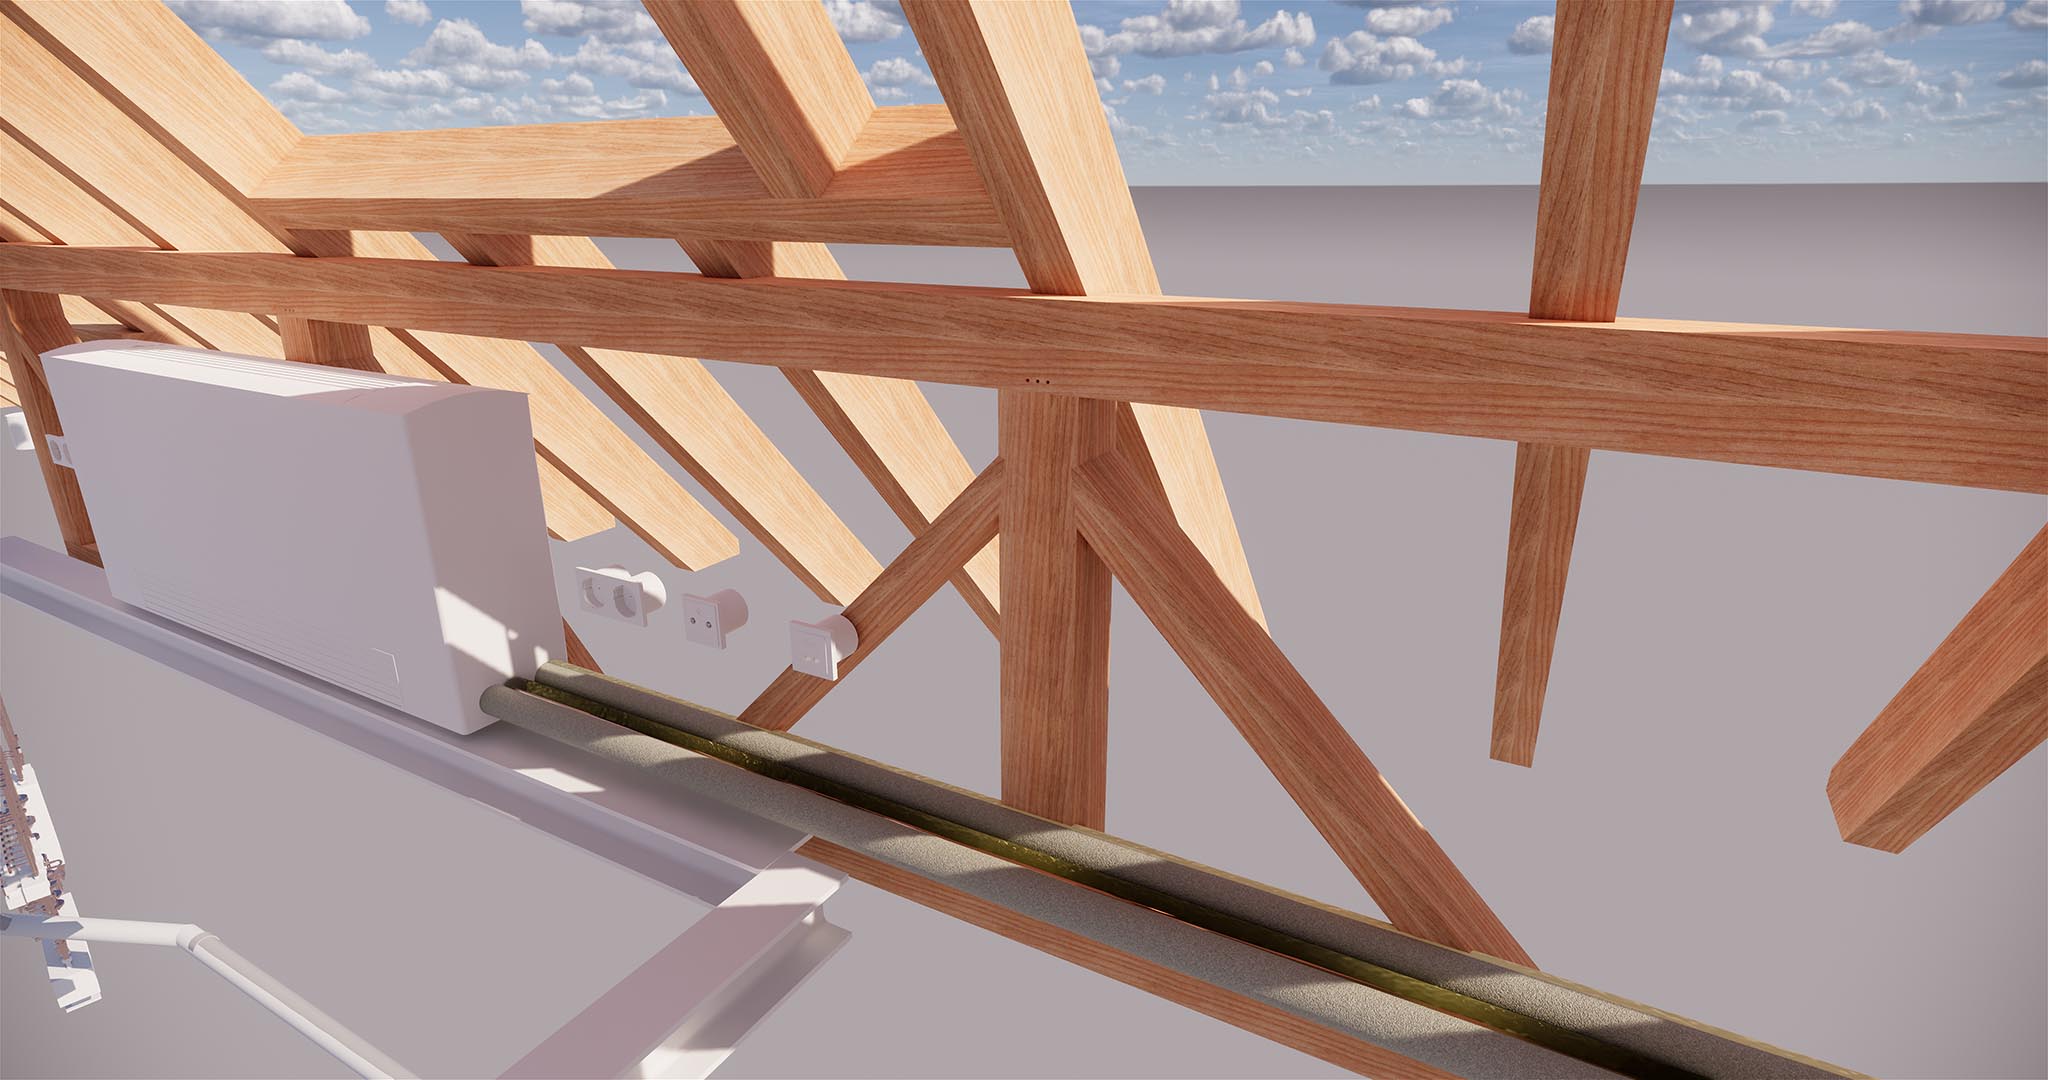 Model Exploration – All Structural Materials Define in Linked Model